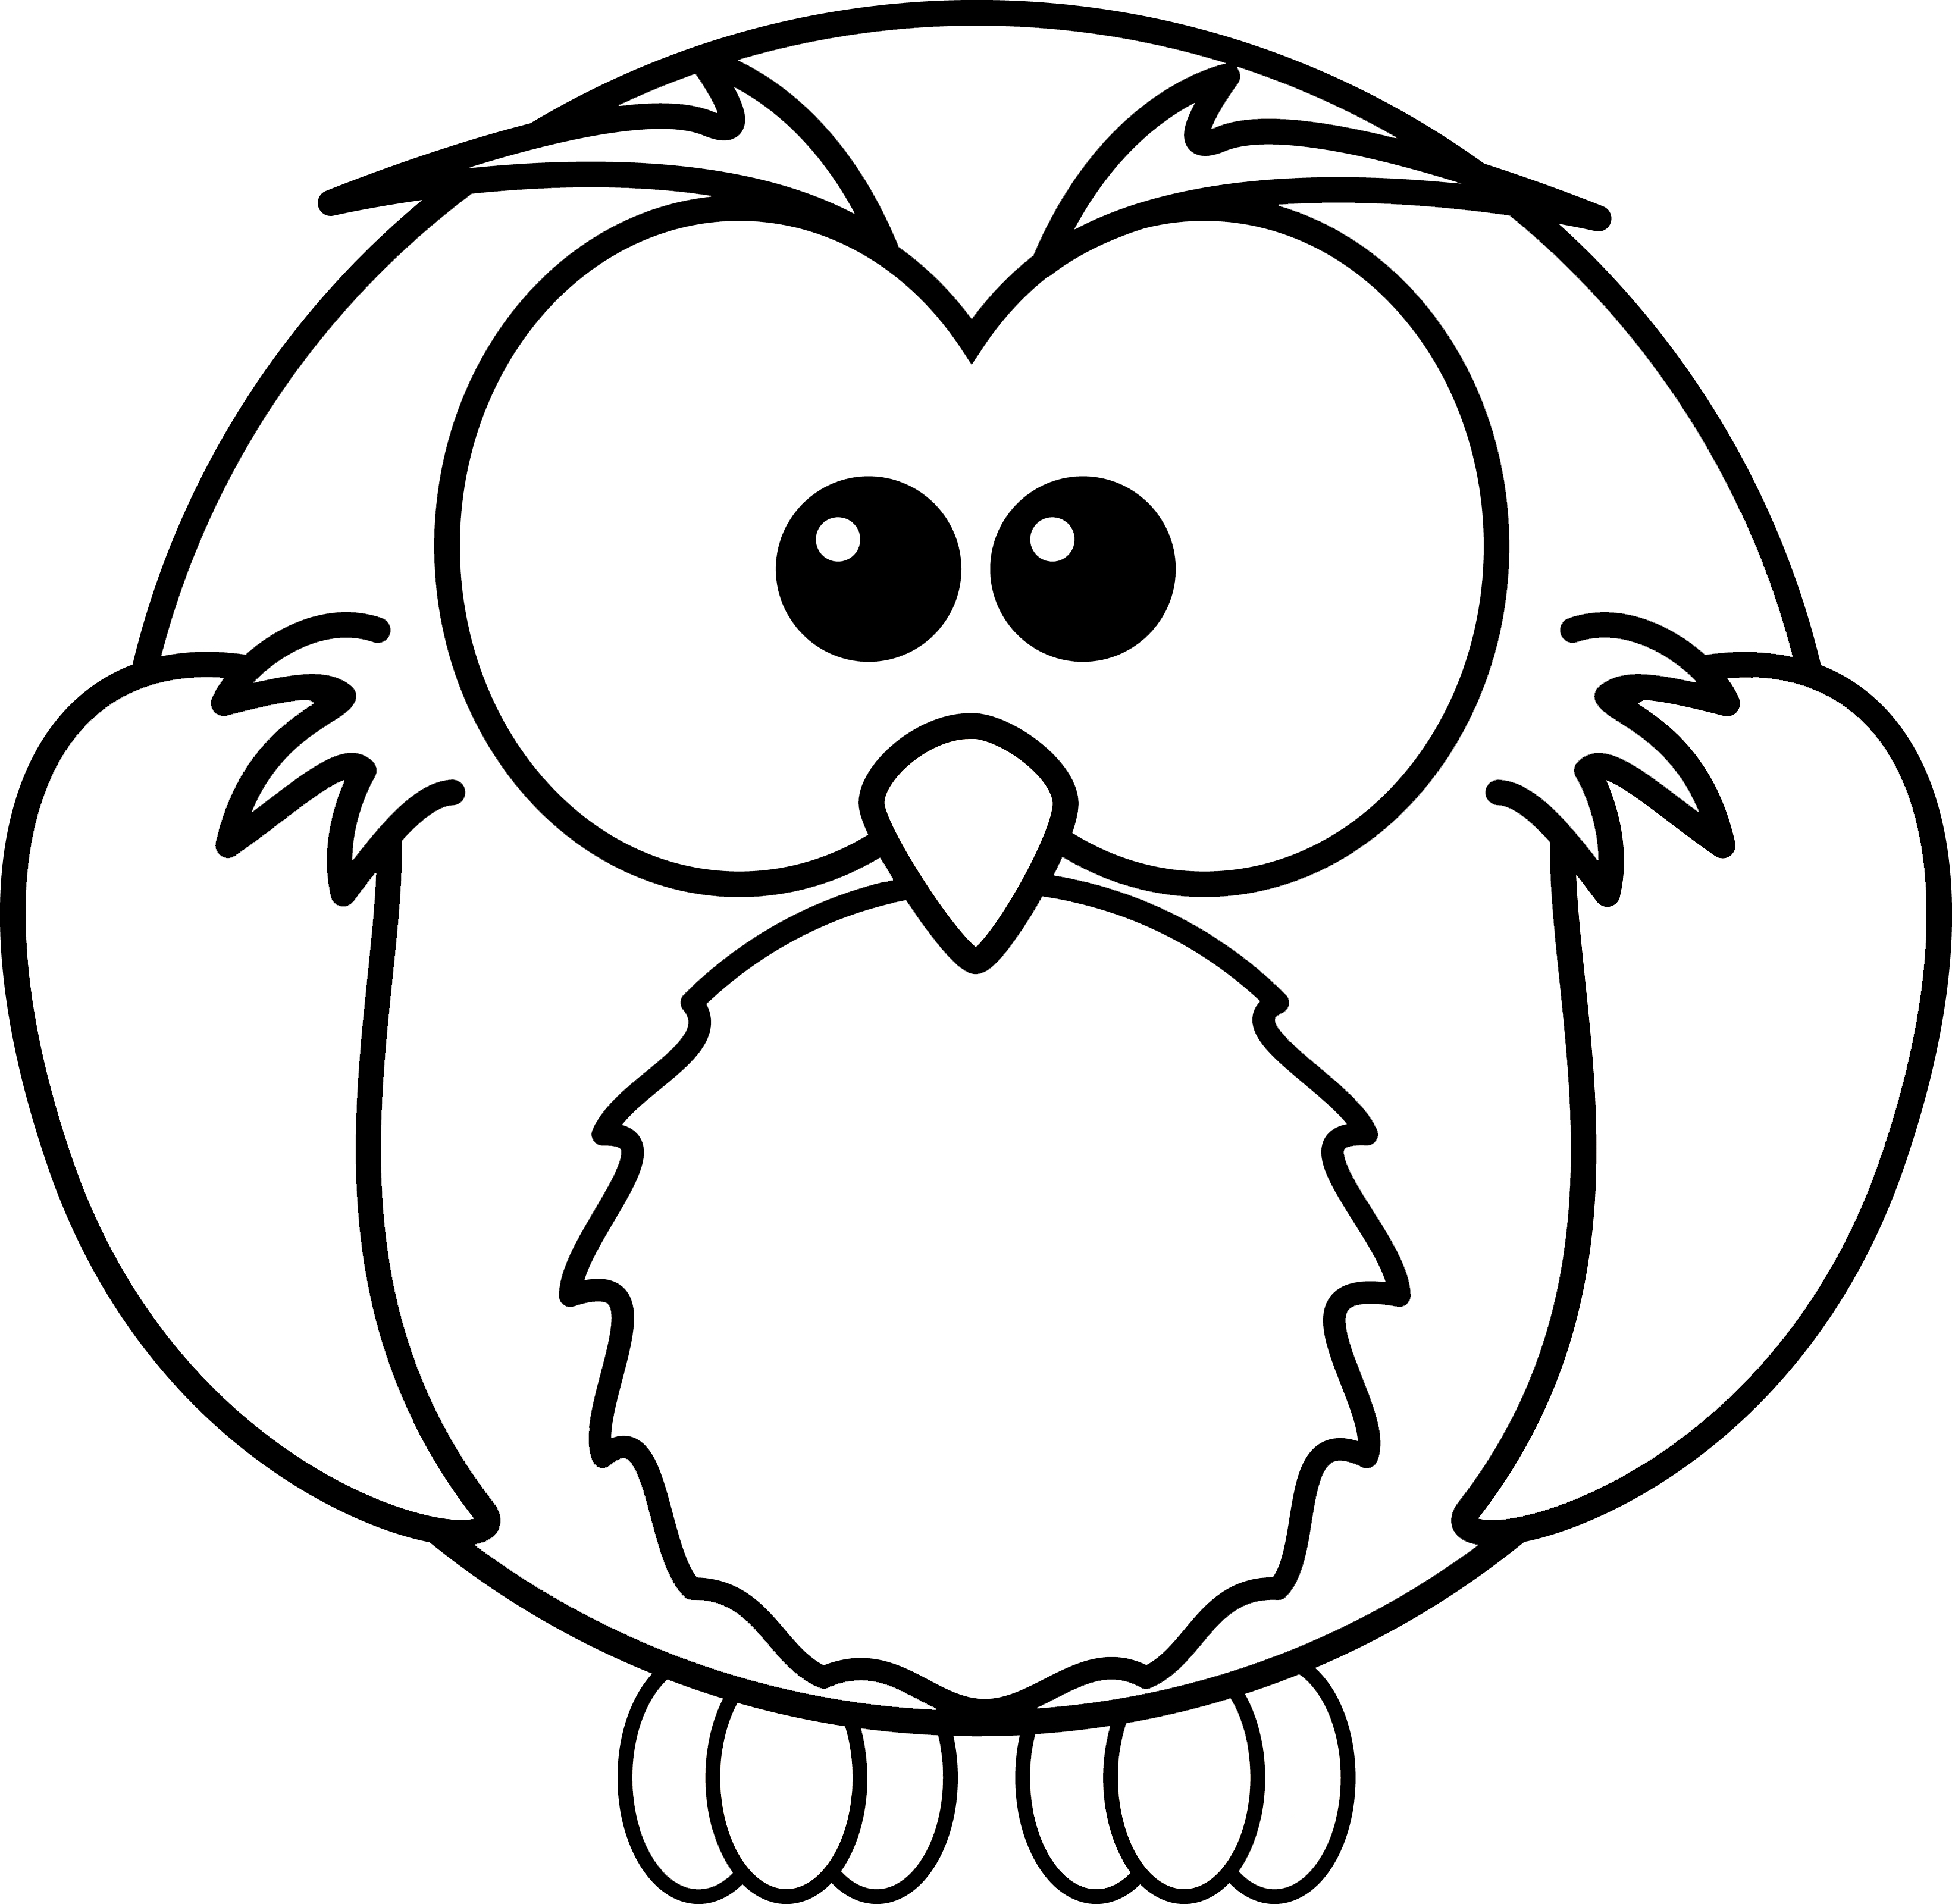 Cartoon Pictures Of Owls - ClipArt Best